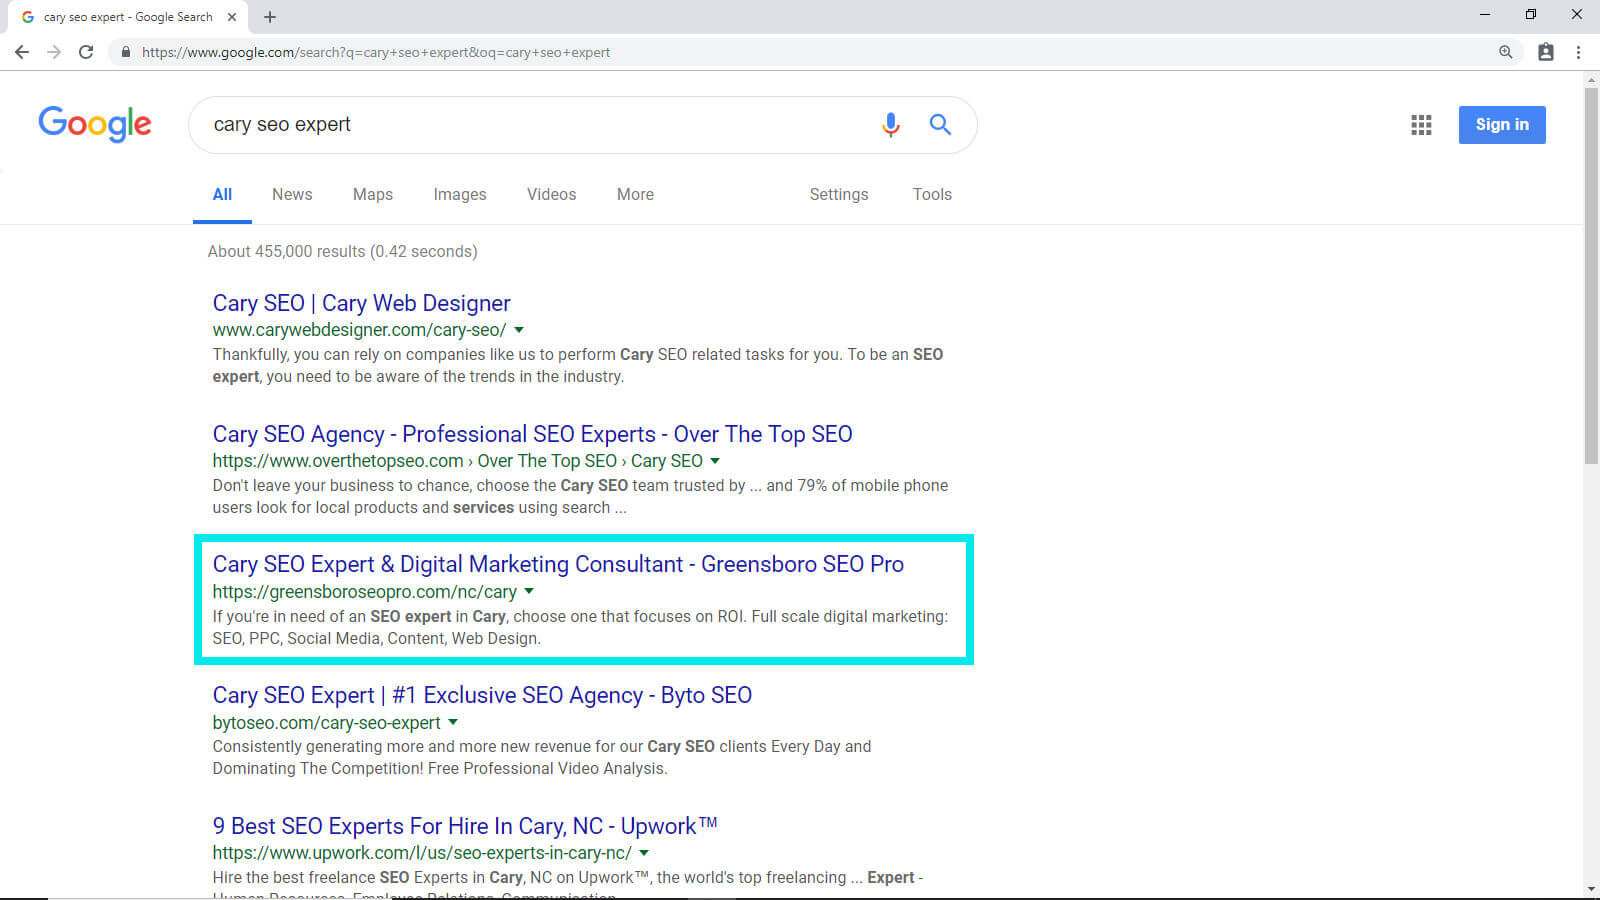 "Cary SEO Expert" - Outcompeting Cary Marketing Firms in Their Own Backyard